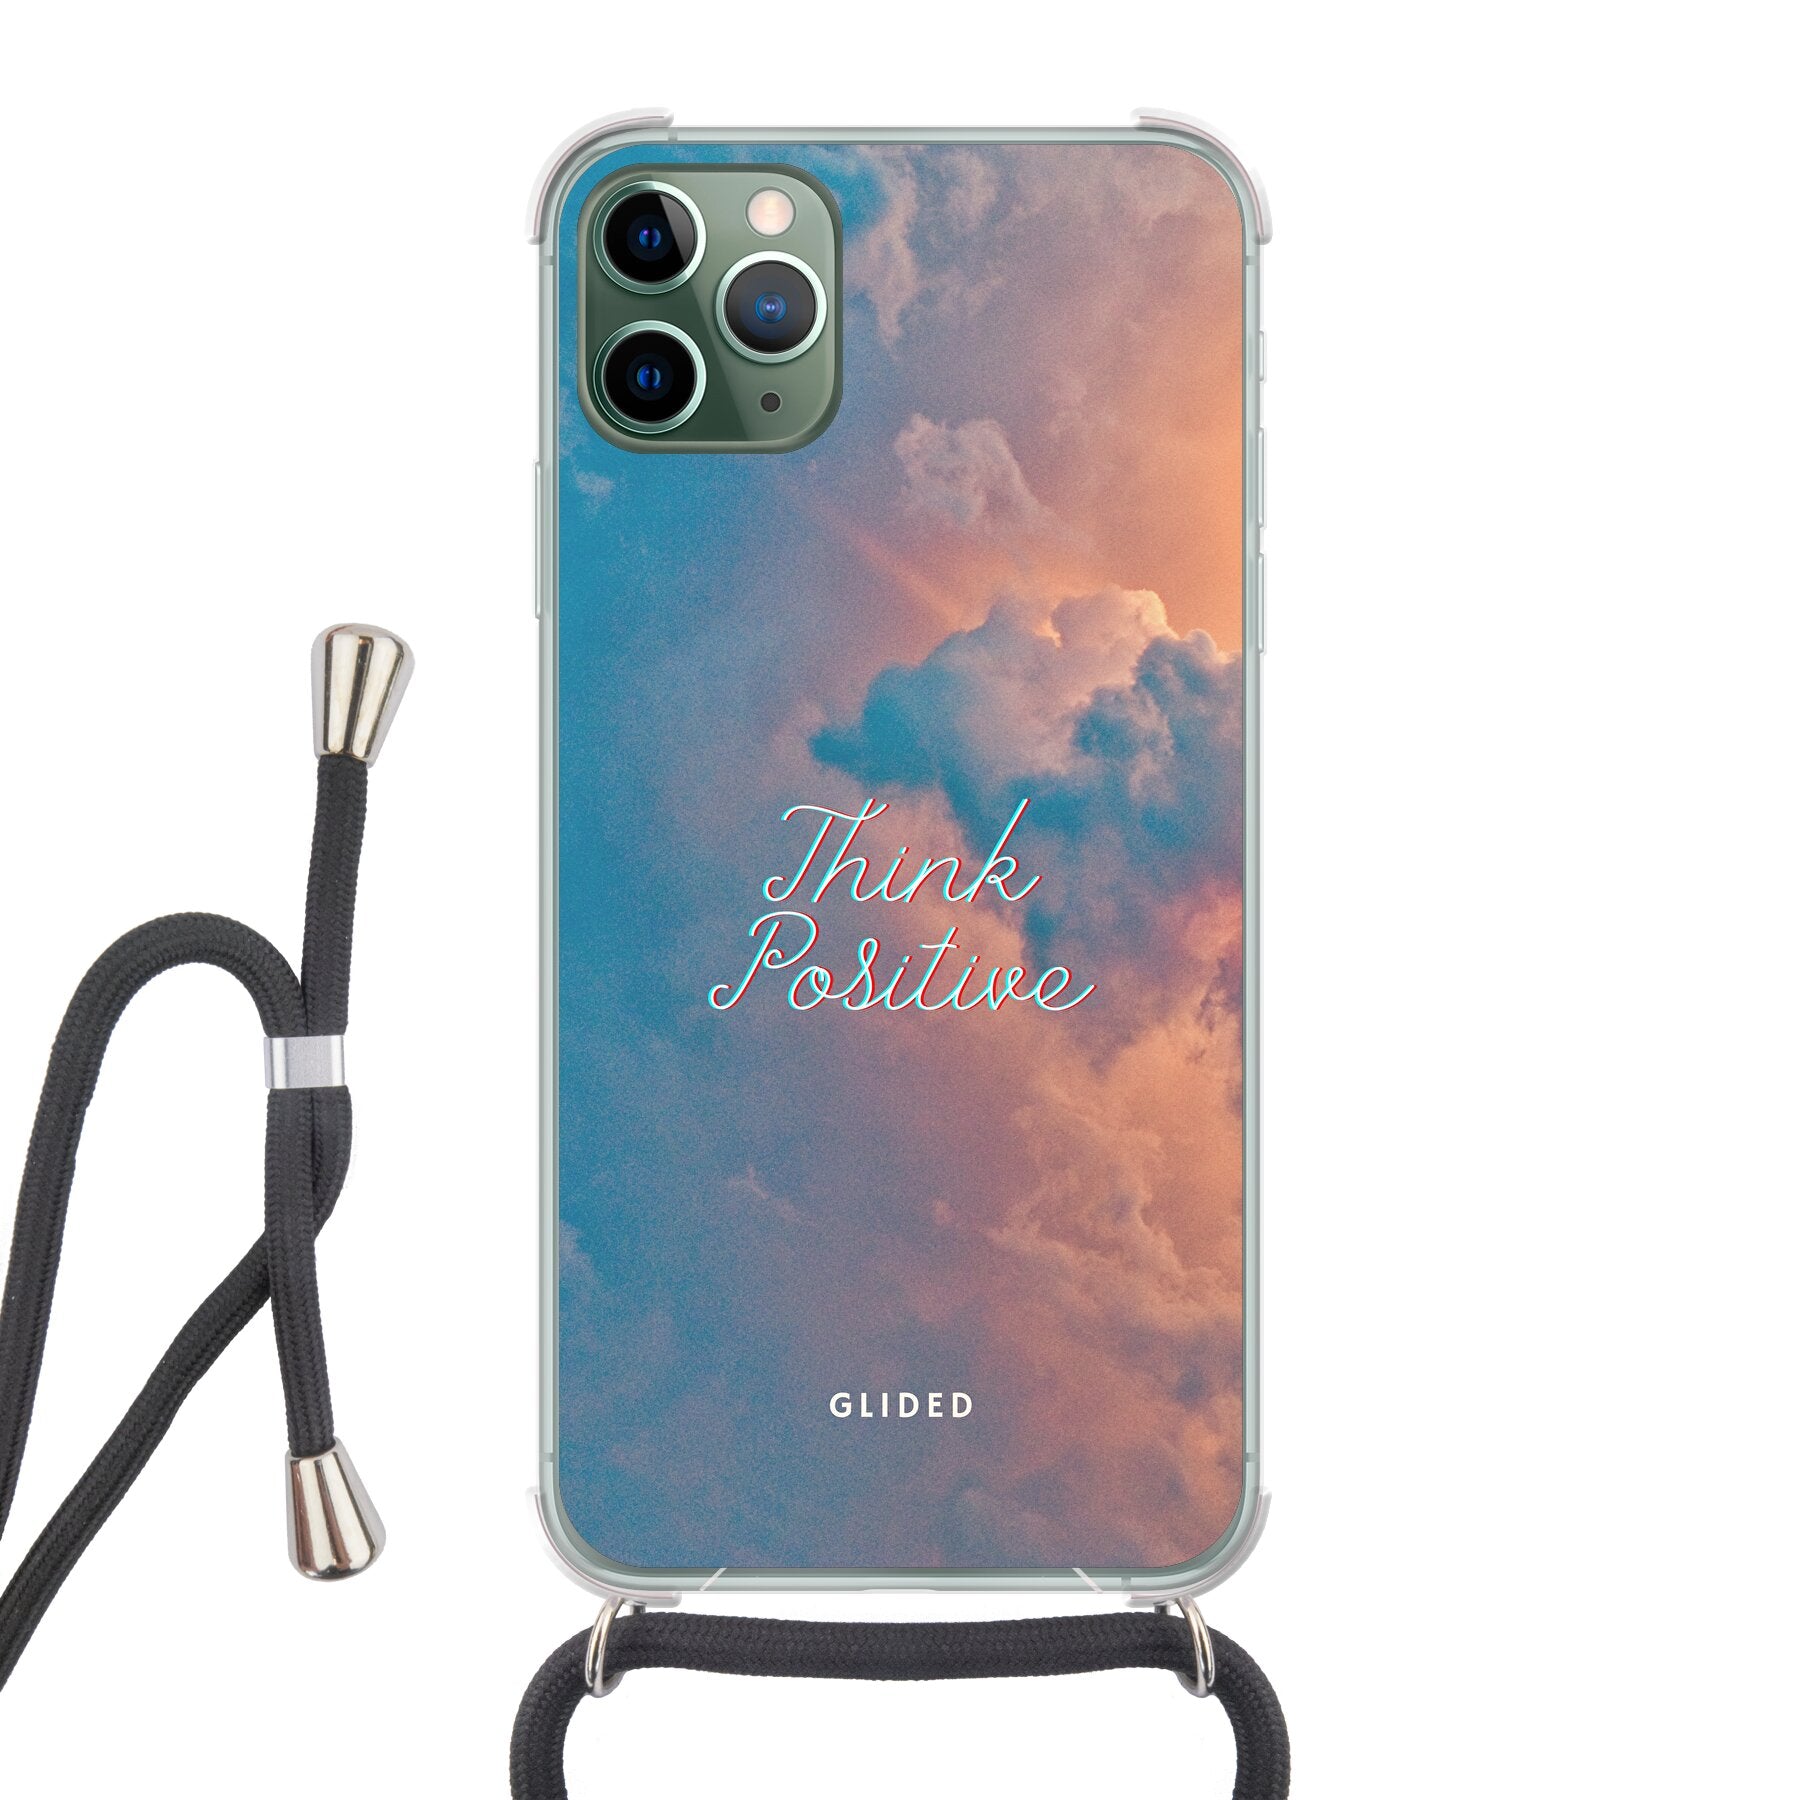 Think positive - iPhone 11 Pro Max Handyhülle Crossbody case mit Band